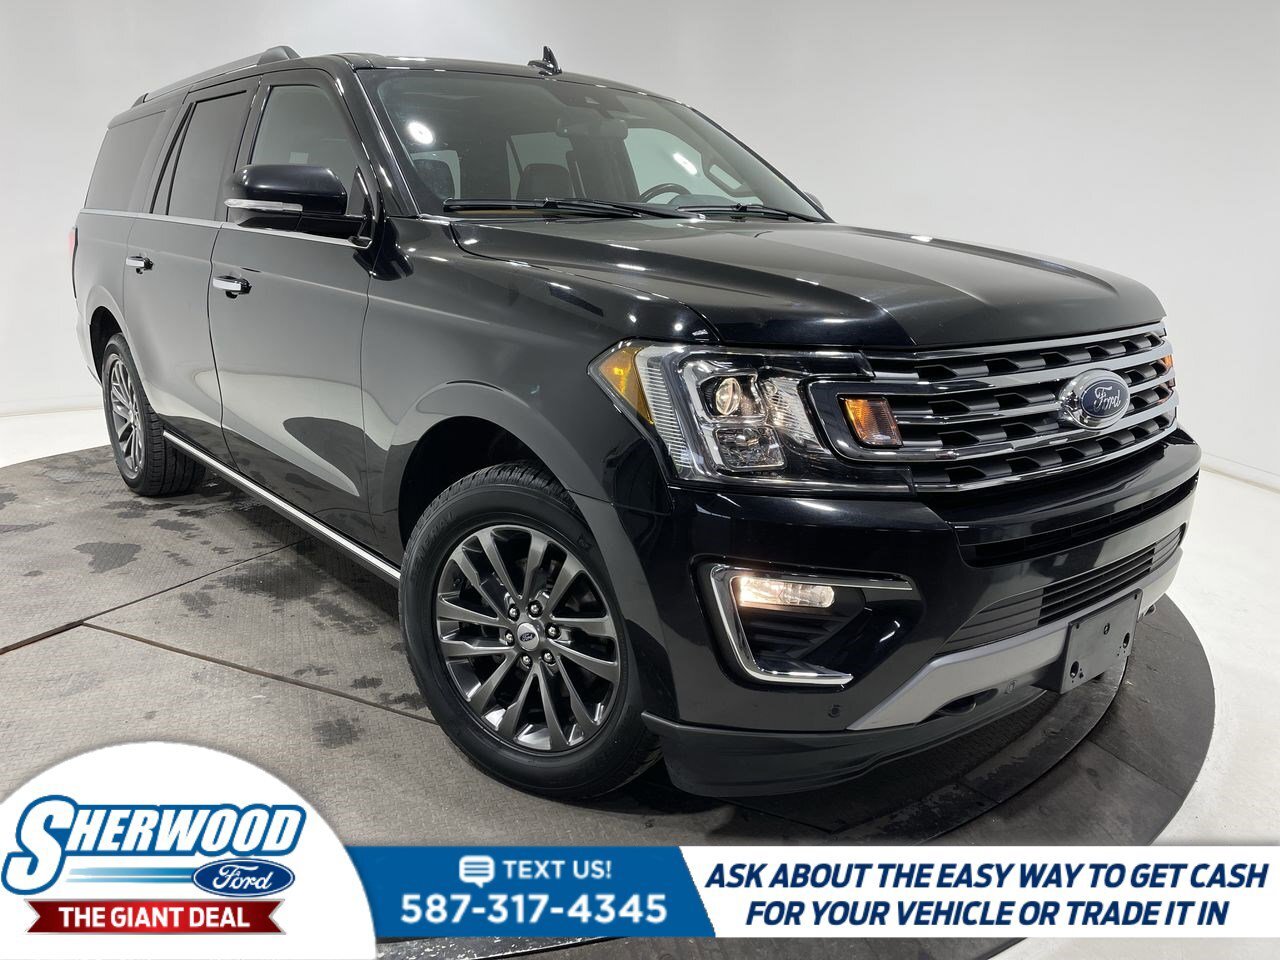 2021 Ford Expedition LTD Max- $0 Down $258 Weekly